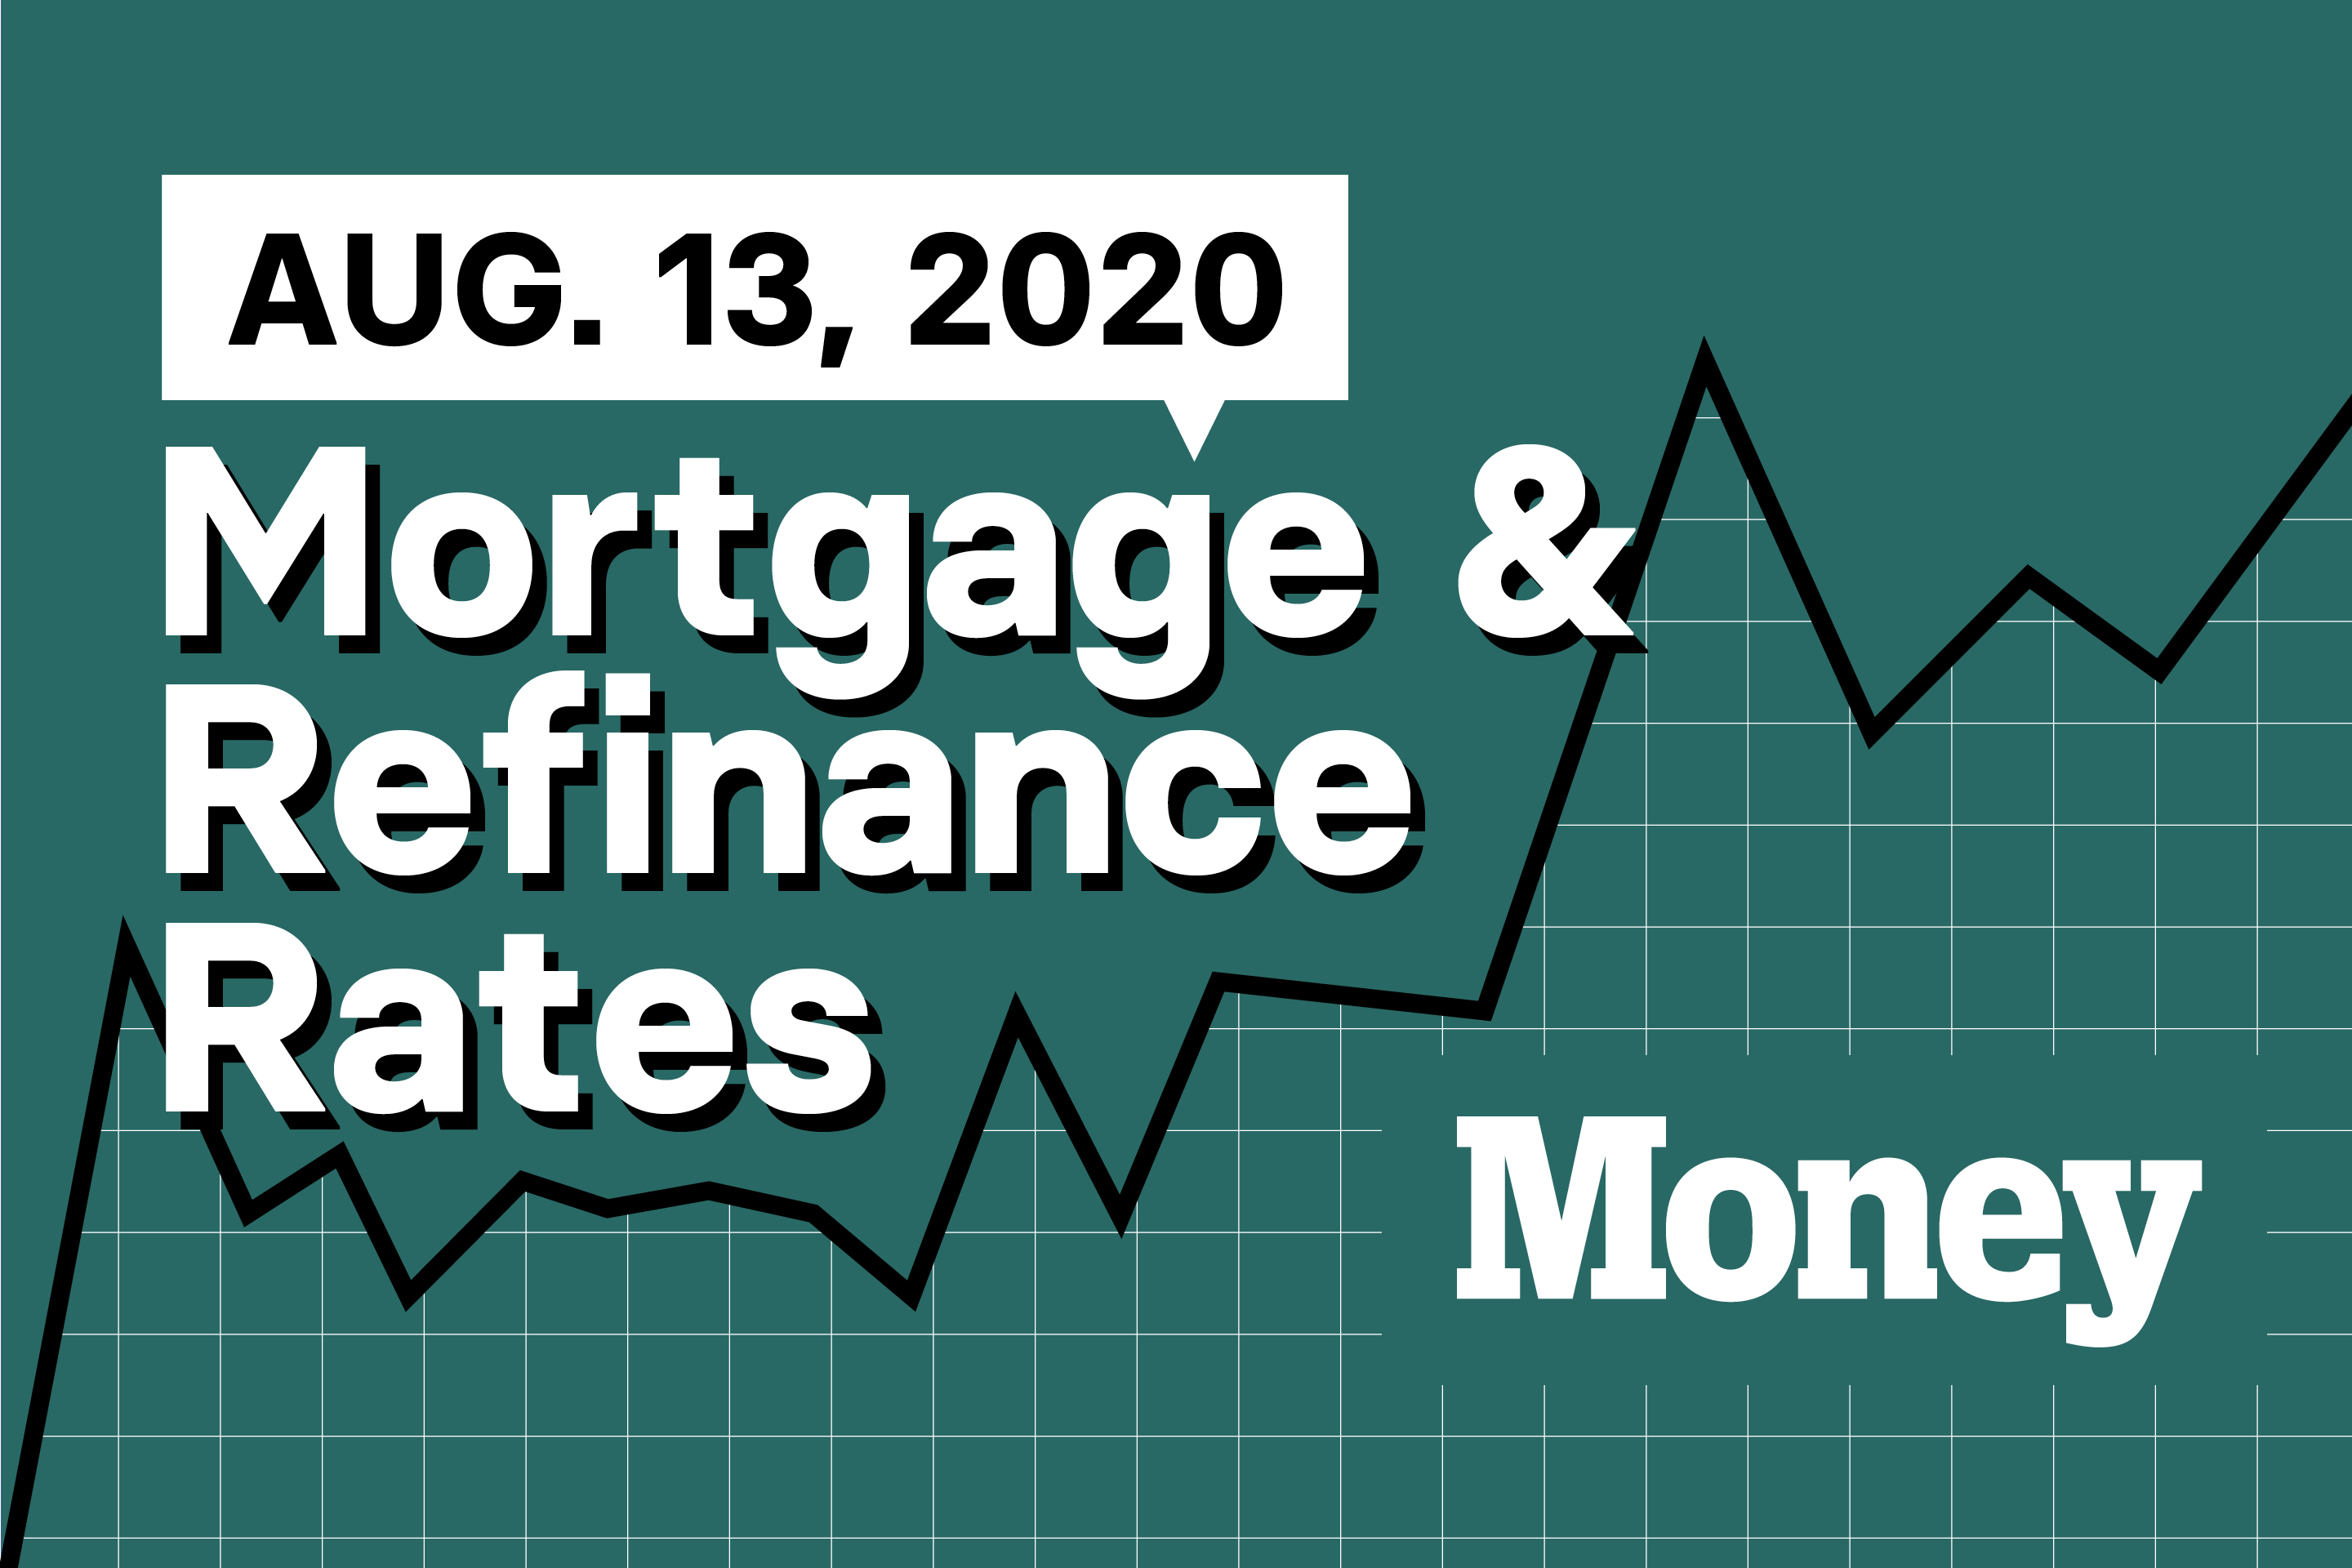 Here Are Today's Best Mortgage & Refinance Rates for August 13, 2020